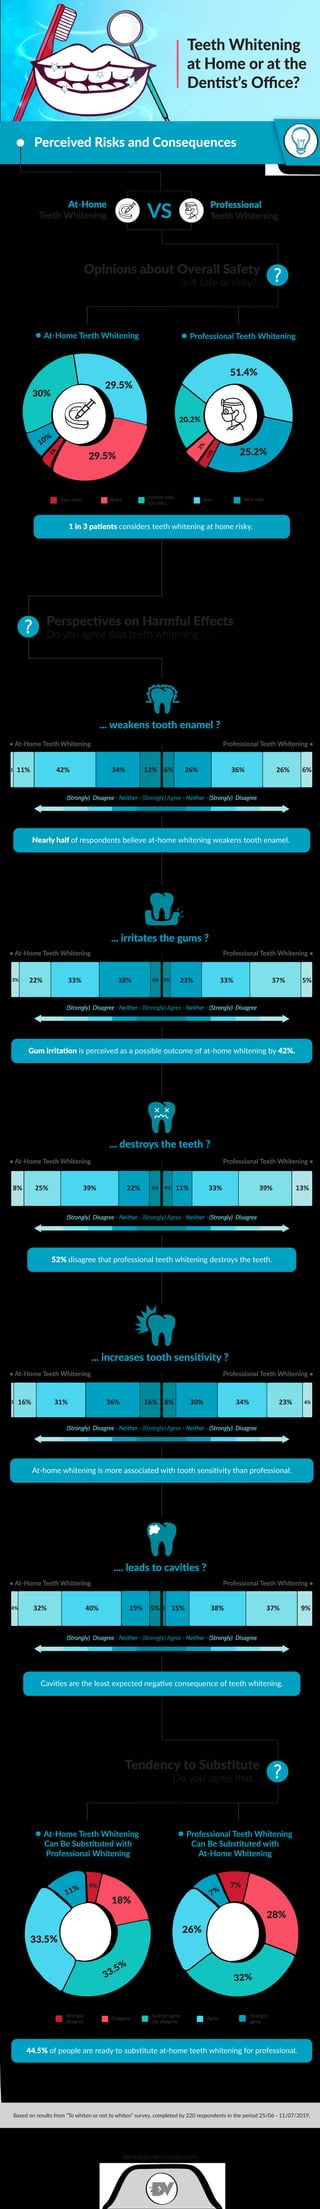 Teeth Whitening
at Home or at the
Dentist’s Oﬃce?
Based on results from “To whiten or not to whiten” survey, completed by 220 respondents in the period 25/06 - 11/07/2019.
dentavox.dentacoin.com
Opinions about Overall Safety
Is it safe or risky?
Tendency to Substitute
Do you agree that...
• At-Home Teeth Whitening
Perceived Risks and Consequences
Perspectives on Harmful Eﬀects
Do you agree that teeth whitening ...?
1 in 3 patients considers teeth whitening at home risky.
Professional
Teeth Whitening
At-Home
Teeth Whitening VS
?
• Professional Teeth Whitening
• At-Home Teeth Whitening Professional Teeth Whitening •
... weakens tooth enamel ?
29.5%
51.4%
25.2%
20.2%
29.5%
30%
10%
1%
<1%
3%
Nearly half of respondents believe at-home whitening weakens tooth enamel.
(Strongly) Disagree - Neither - (Strongly) Agree - Neither - (Strongly) Disagree
22% 33% 38% 3%3% 4% 23% 33% 37% 5%
11% 42% 34% 12% 11% 13%33% 39%
52% disagree that professional teeth whitening destroys the teeth.
• At-Home Teeth Whitening
(Strongly) Disagree - Neither - (Strongly) Agree - Neither - (Strongly) Disagree
Professional Teeth Whitening •
... destroys the teeth ?
Gum irritation is perceived as a possible outcome of at-home whitening by 42%.
• At-Home Teeth Whitening
(Strongly) Disagree - Neither - (Strongly) Agree - Neither - (Strongly) Disagree
Professional Teeth Whitening •
• At-Home Teeth Whitening Professional Teeth Whitening •
... irritates the gums ?
8% 25% 39% 22% 4%6%
12% 30% 34% 23%
At-home whitening is more associated with tooth sensitivity than professional.
Cavities are the least expected negative consequence of teeth whitening.
• At-Home Teeth Whitening
(Strongly) Disagree - Neither - (Strongly) Agree - Neither - (Strongly) Disagree
Professional Teeth Whitening •
... increases tooth sensitivity ?
16% 8%16% 31% 36%1
15% 38% 37%
• At-Home Teeth Whitening
(Strongly) Disagree - Neither - (Strongly) Agree - Neither - (Strongly) Disagree
Professional Teeth Whitening •
.... leads to cavities ?
5% 9%32% 40% 19%4% 1
11% 42% 34% 12% 6% 26% 36% 26% 6%1
4%
Very risky Risky
Neither safe,
nor risky
Safe Very safe
• At-Home Teeth Whitening
Can Be Substituted with
Professional Whitening
• Professional Teeth Whitening
Can Be Substituted with
At-Home Whitening
?
28%
7%
32%
Strongly
disagree
Disagree
Neither agree
nor disagree
Agree
Strongly
agree
44.5% of people are ready to substitute at-home teeth whitening for professional.
26%
7%
18%
4%
33.5%
33.5%
11%
 